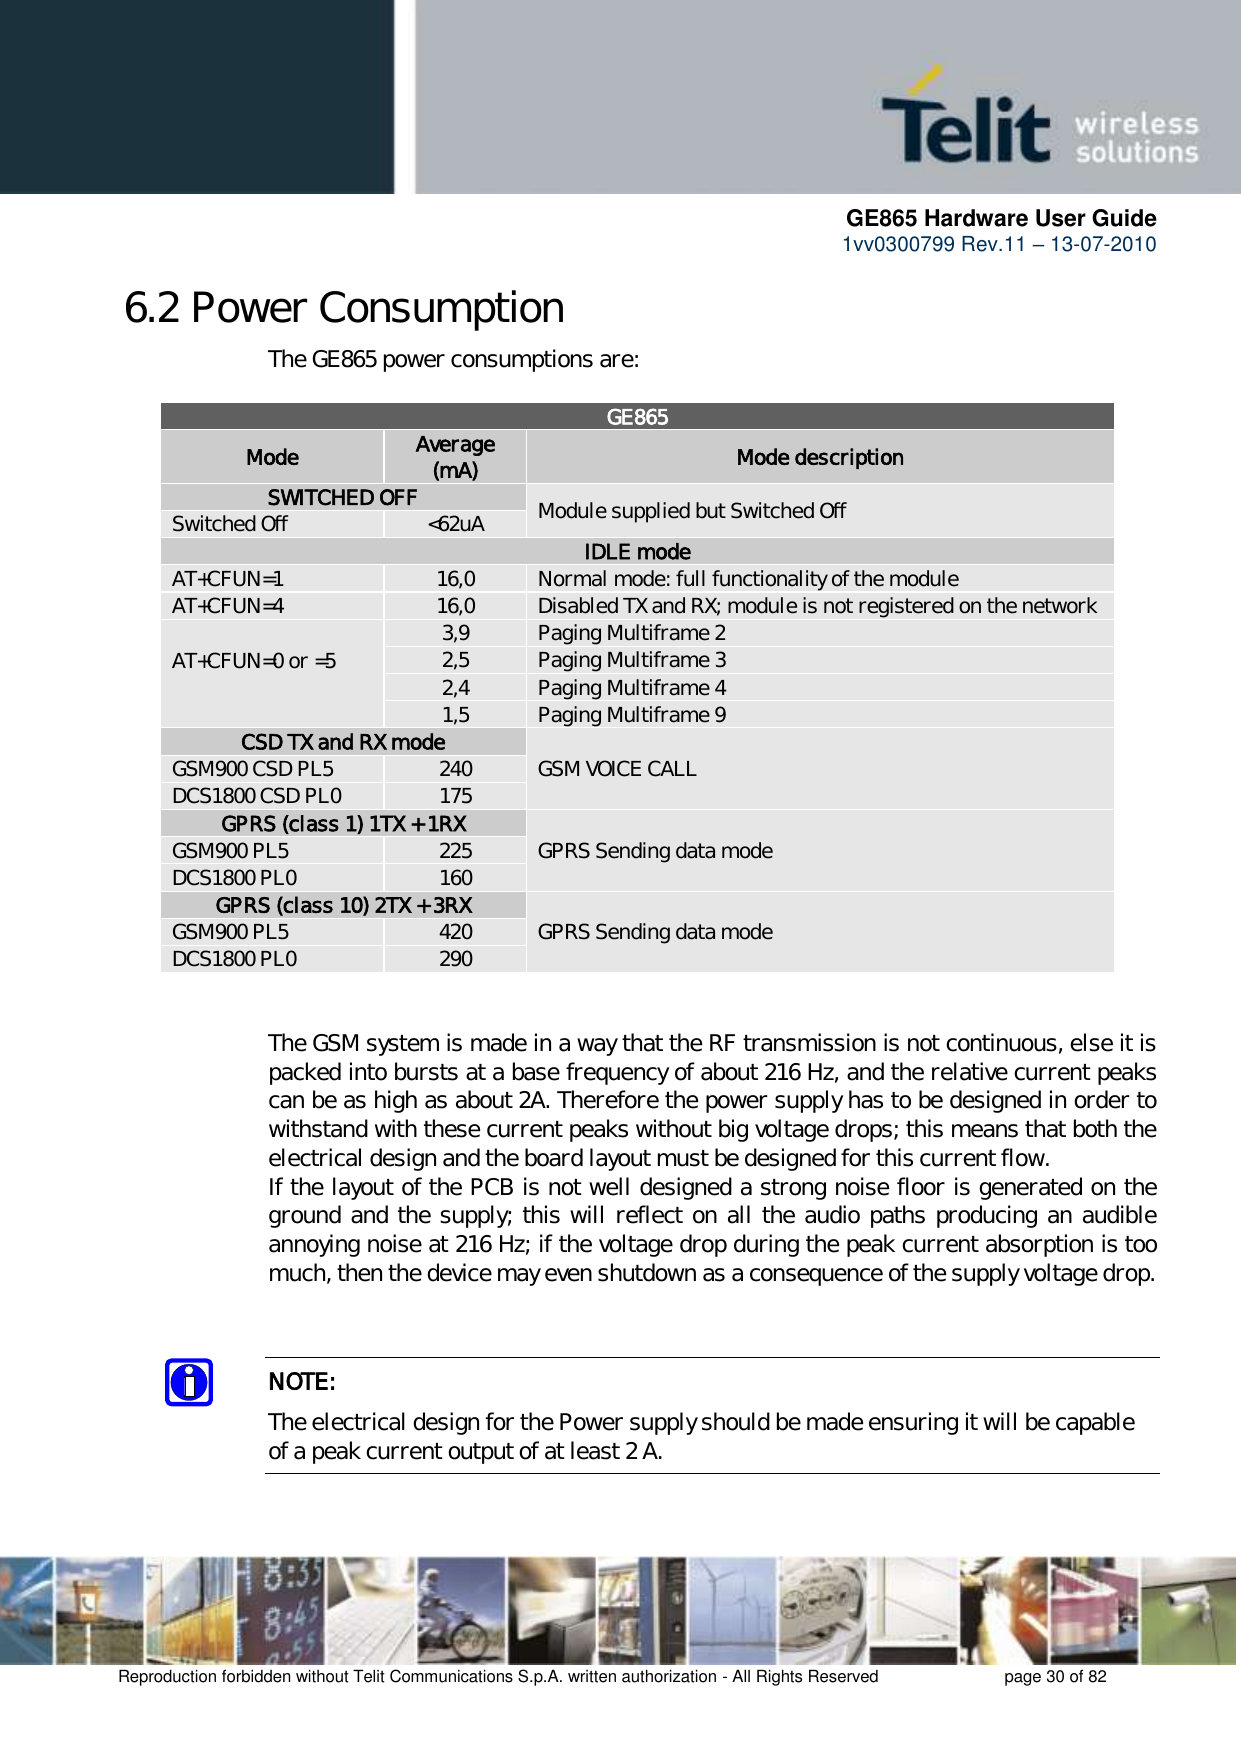      GE865 Hardware User Guide 1vv0300799 Rev.11 – 13-07-2010       Reproduction forbidden without Telit Communications S.p.A. written authorization - All Rights Reserved    page 30 of 82  6.2 Power Consumption The GE865 power consumptions are:   GE865 Mode Average (mA) Mode description SWITCHED OFF Module supplied but Switched Off Switched Off &lt;62uA IDLE mode AT+CFUN=1 16,0 Normal mode: full functionality of the module AT+CFUN=4 16,0 Disabled TX and RX; module is not registered on the network AT+CFUN=0 or =5  3,9 Paging Multiframe 2 2,5 Paging Multiframe 3 2,4 Paging Multiframe 4 1,5 Paging Multiframe 9 CSD TX and RX mode GSM VOICE CALL GSM900 CSD PL5 240 DCS1800 CSD PL0 175 GPRS (class 1) 1TX + 1RX GPRS Sending data mode GSM900 PL5 225 DCS1800 PL0 160 GPRS (class 10) 2TX + 3RX GPRS Sending data mode GSM900 PL5 420 DCS1800 PL0 290   The GSM system is made in a way that the RF transmission is not continuous, else it is packed into bursts at a base frequency of about 216 Hz, and the relative current peaks can be as high as about 2A. Therefore the power supply has to be designed in order to withstand with these current peaks without big voltage drops; this means that both the electrical design and the board layout must be designed for this current flow. If the layout of the PCB is not well designed a strong noise floor is generated on the ground and the supply; this will reflect on all the audio paths producing an audible annoying noise at 216 Hz; if the voltage drop during the peak current absorption is too much, then the device may even shutdown as a consequence of the supply voltage drop.   NOTE: The electrical design for the Power supply should be made ensuring it will be capable of a peak current output of at least 2 A.  